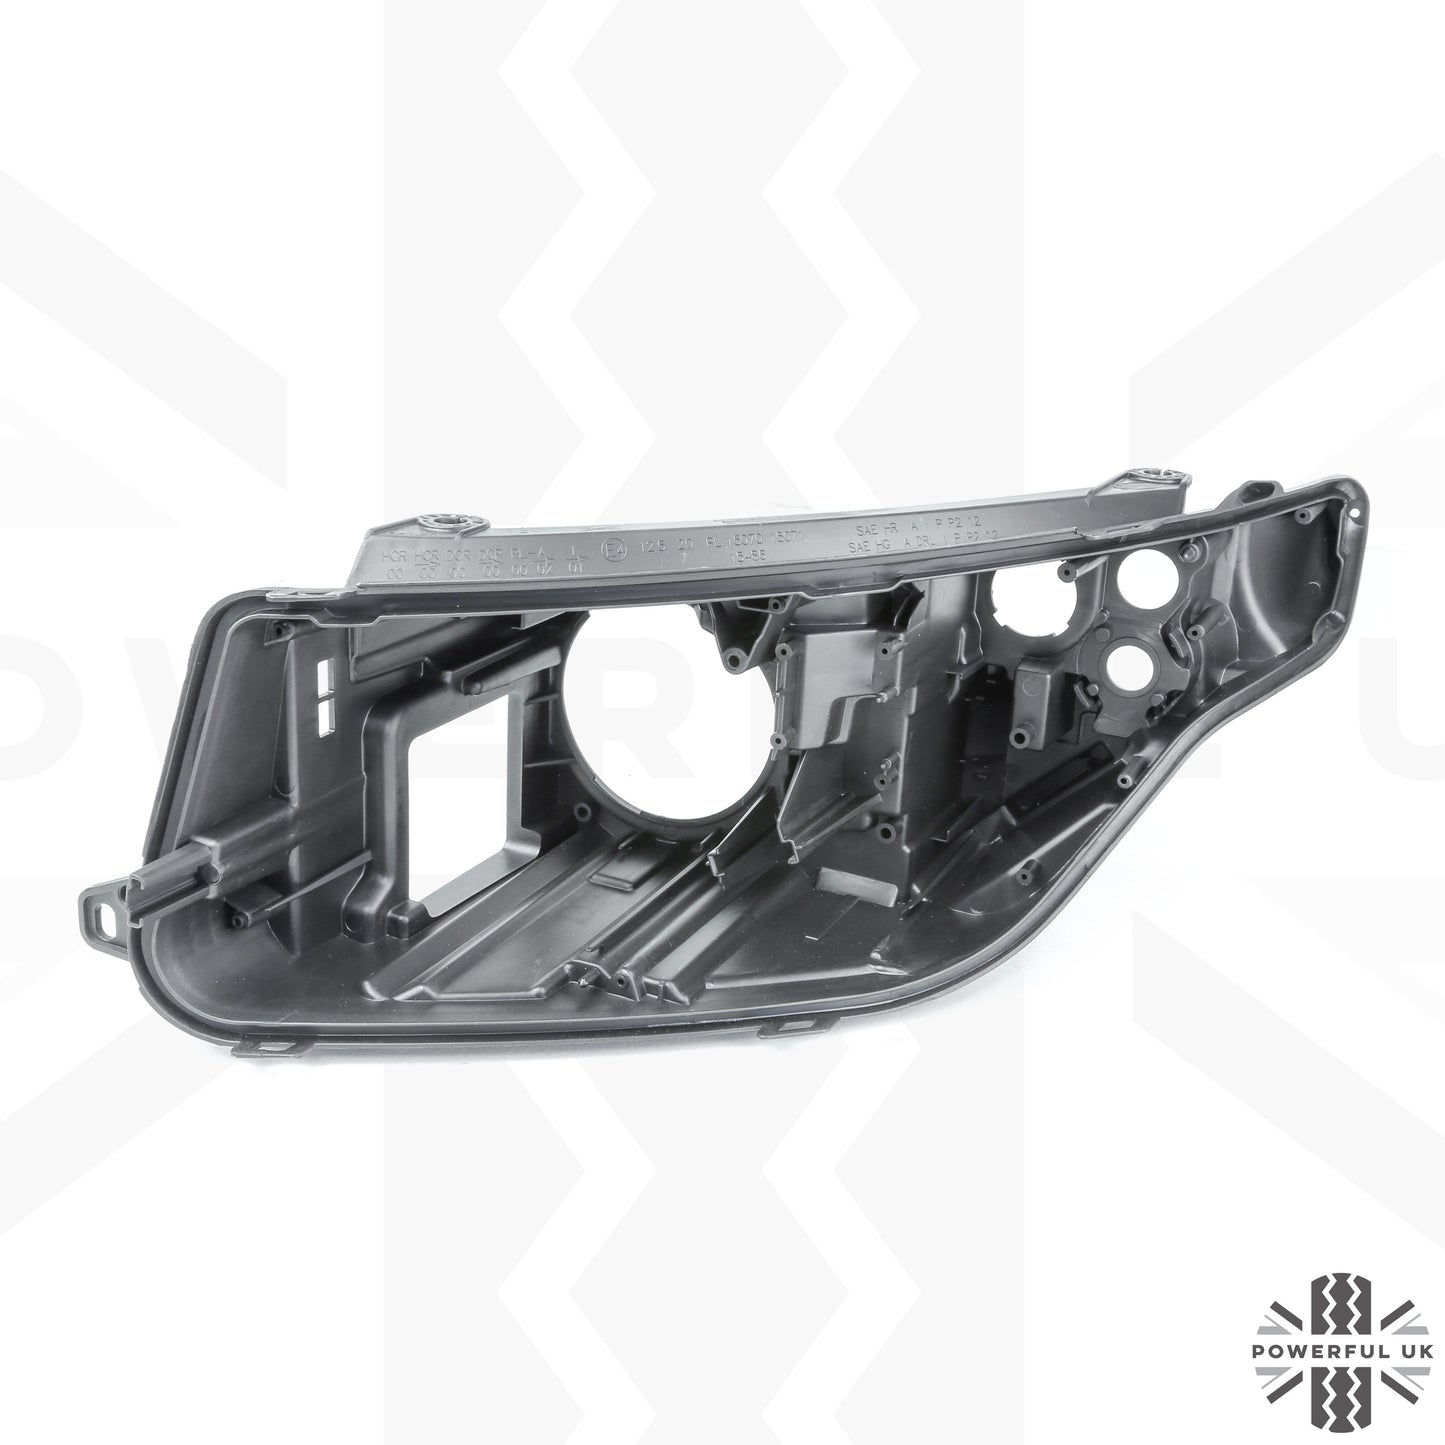 Replacement Headlight Rear Housing for Range Rover Evoque 2011-15 - LH